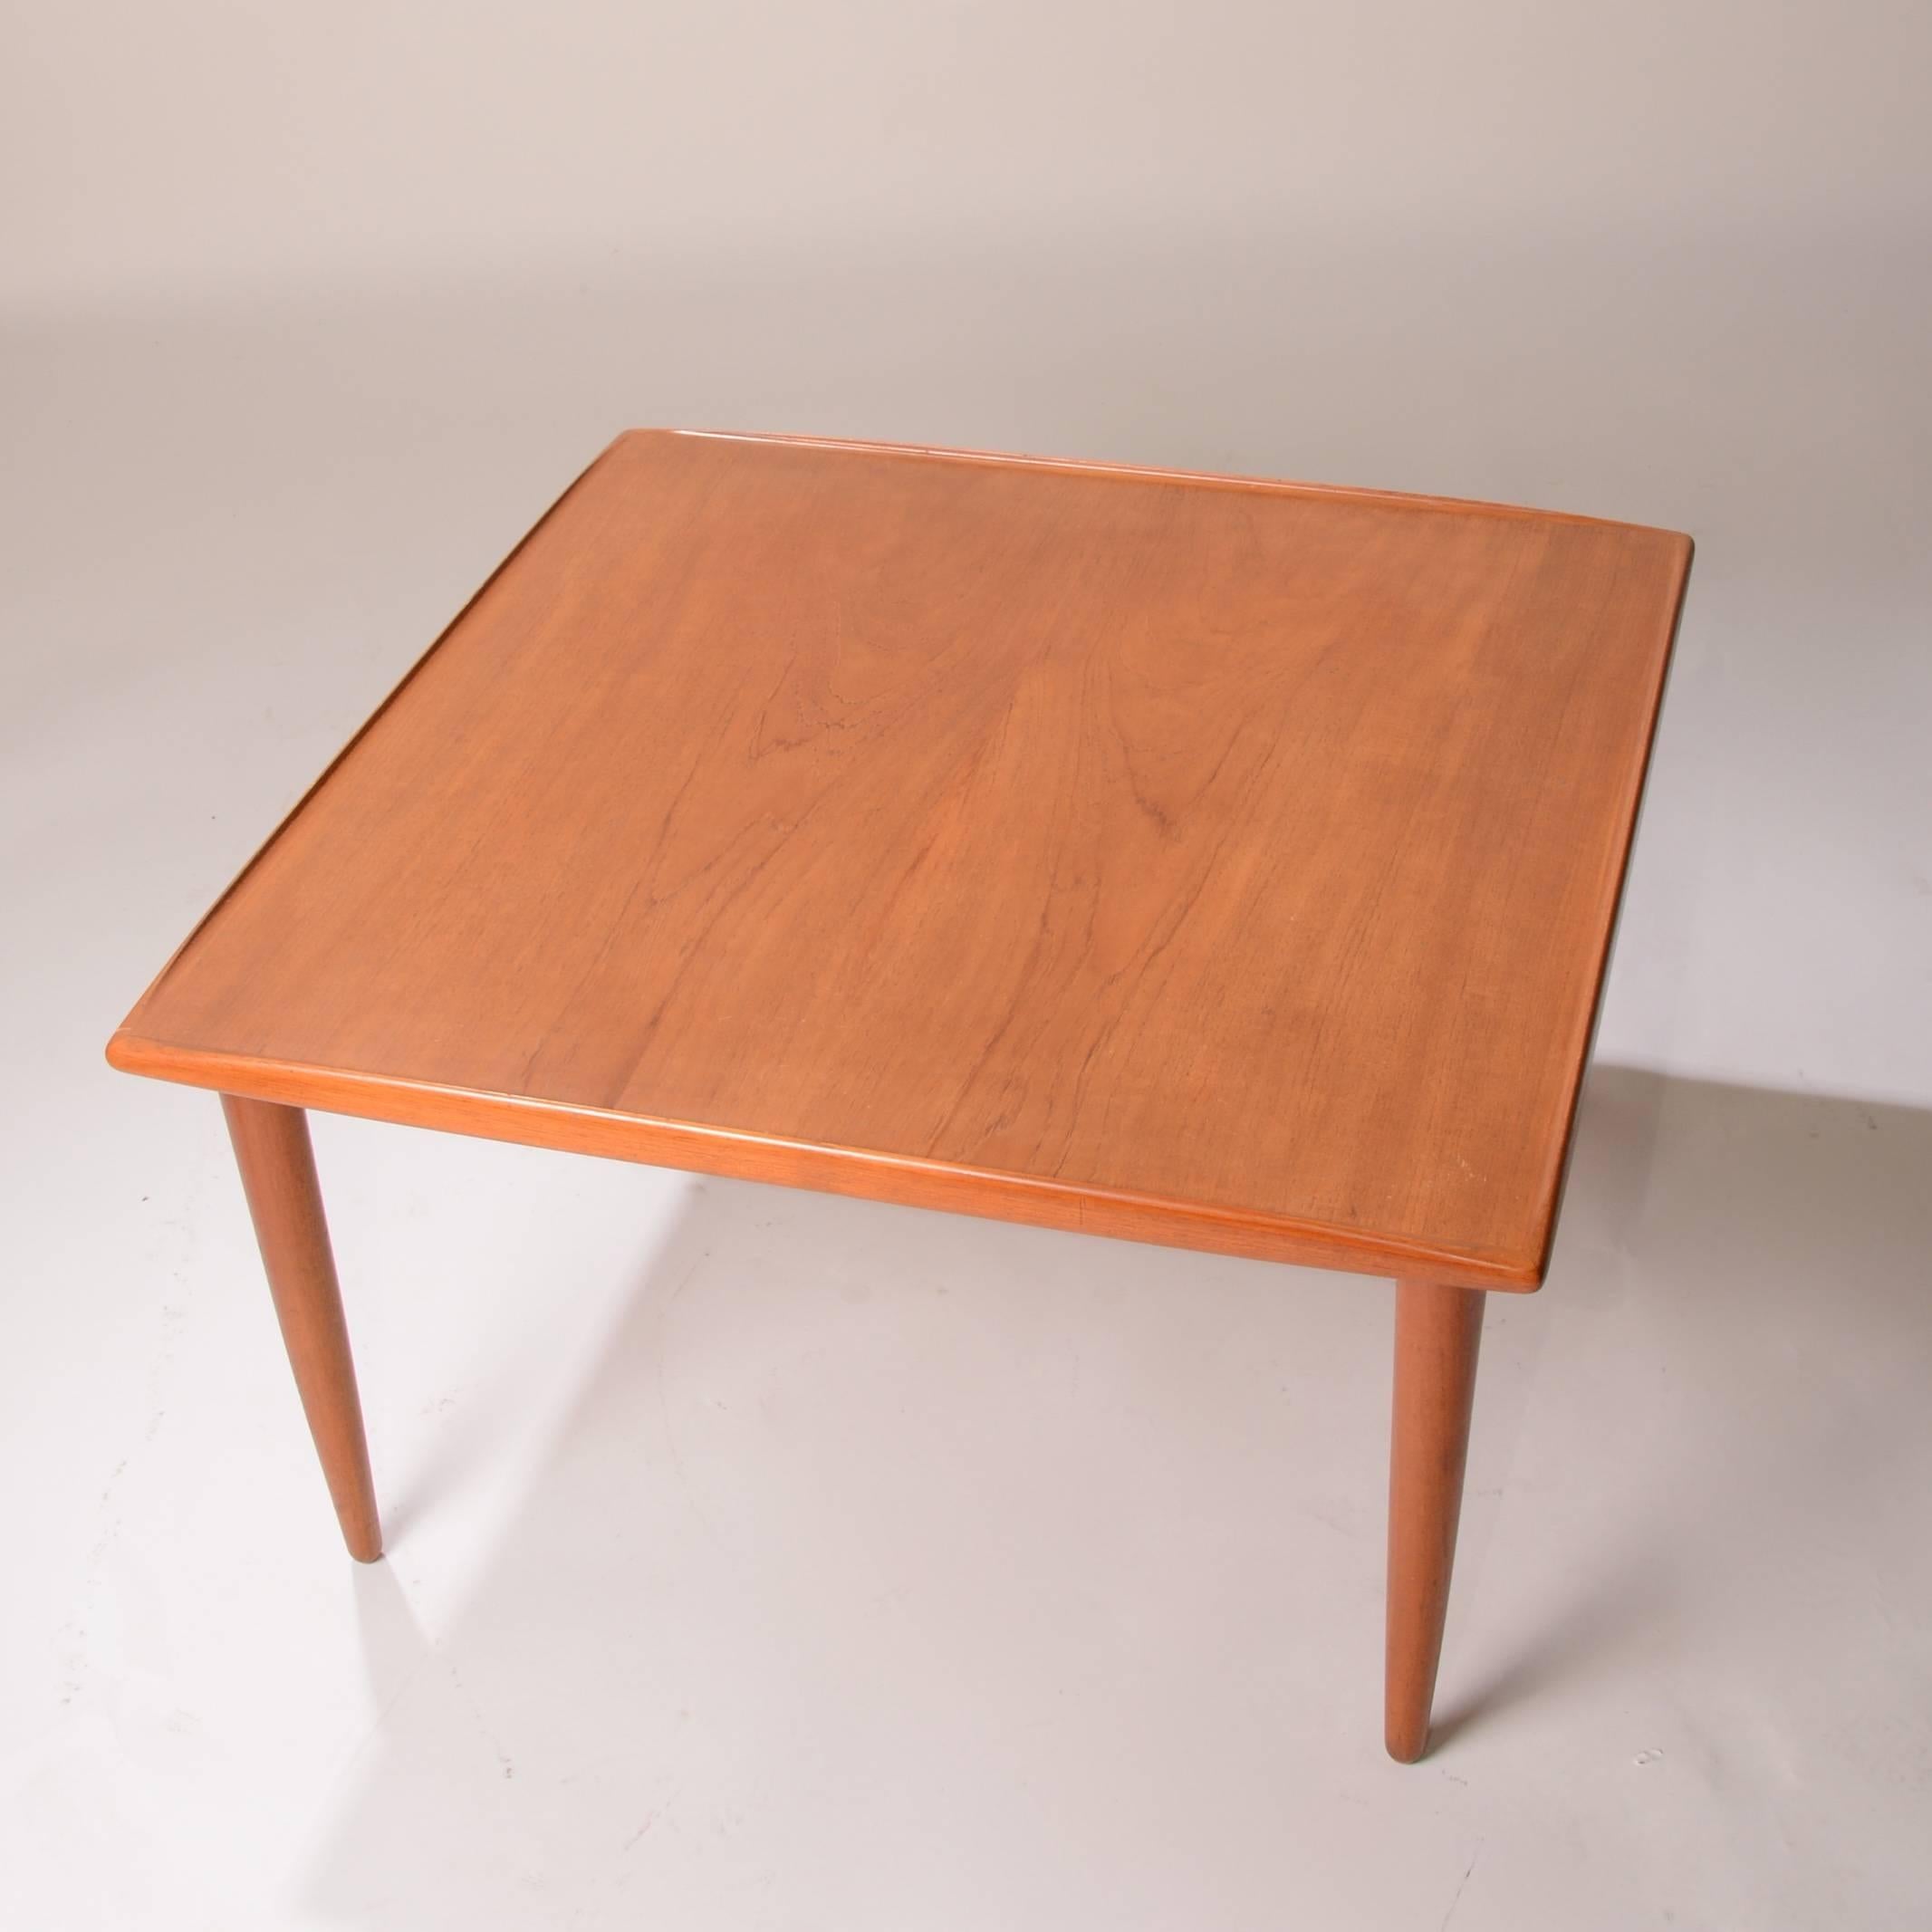 Danish Modern Square Teak Table In Good Condition For Sale In Los Angeles, CA